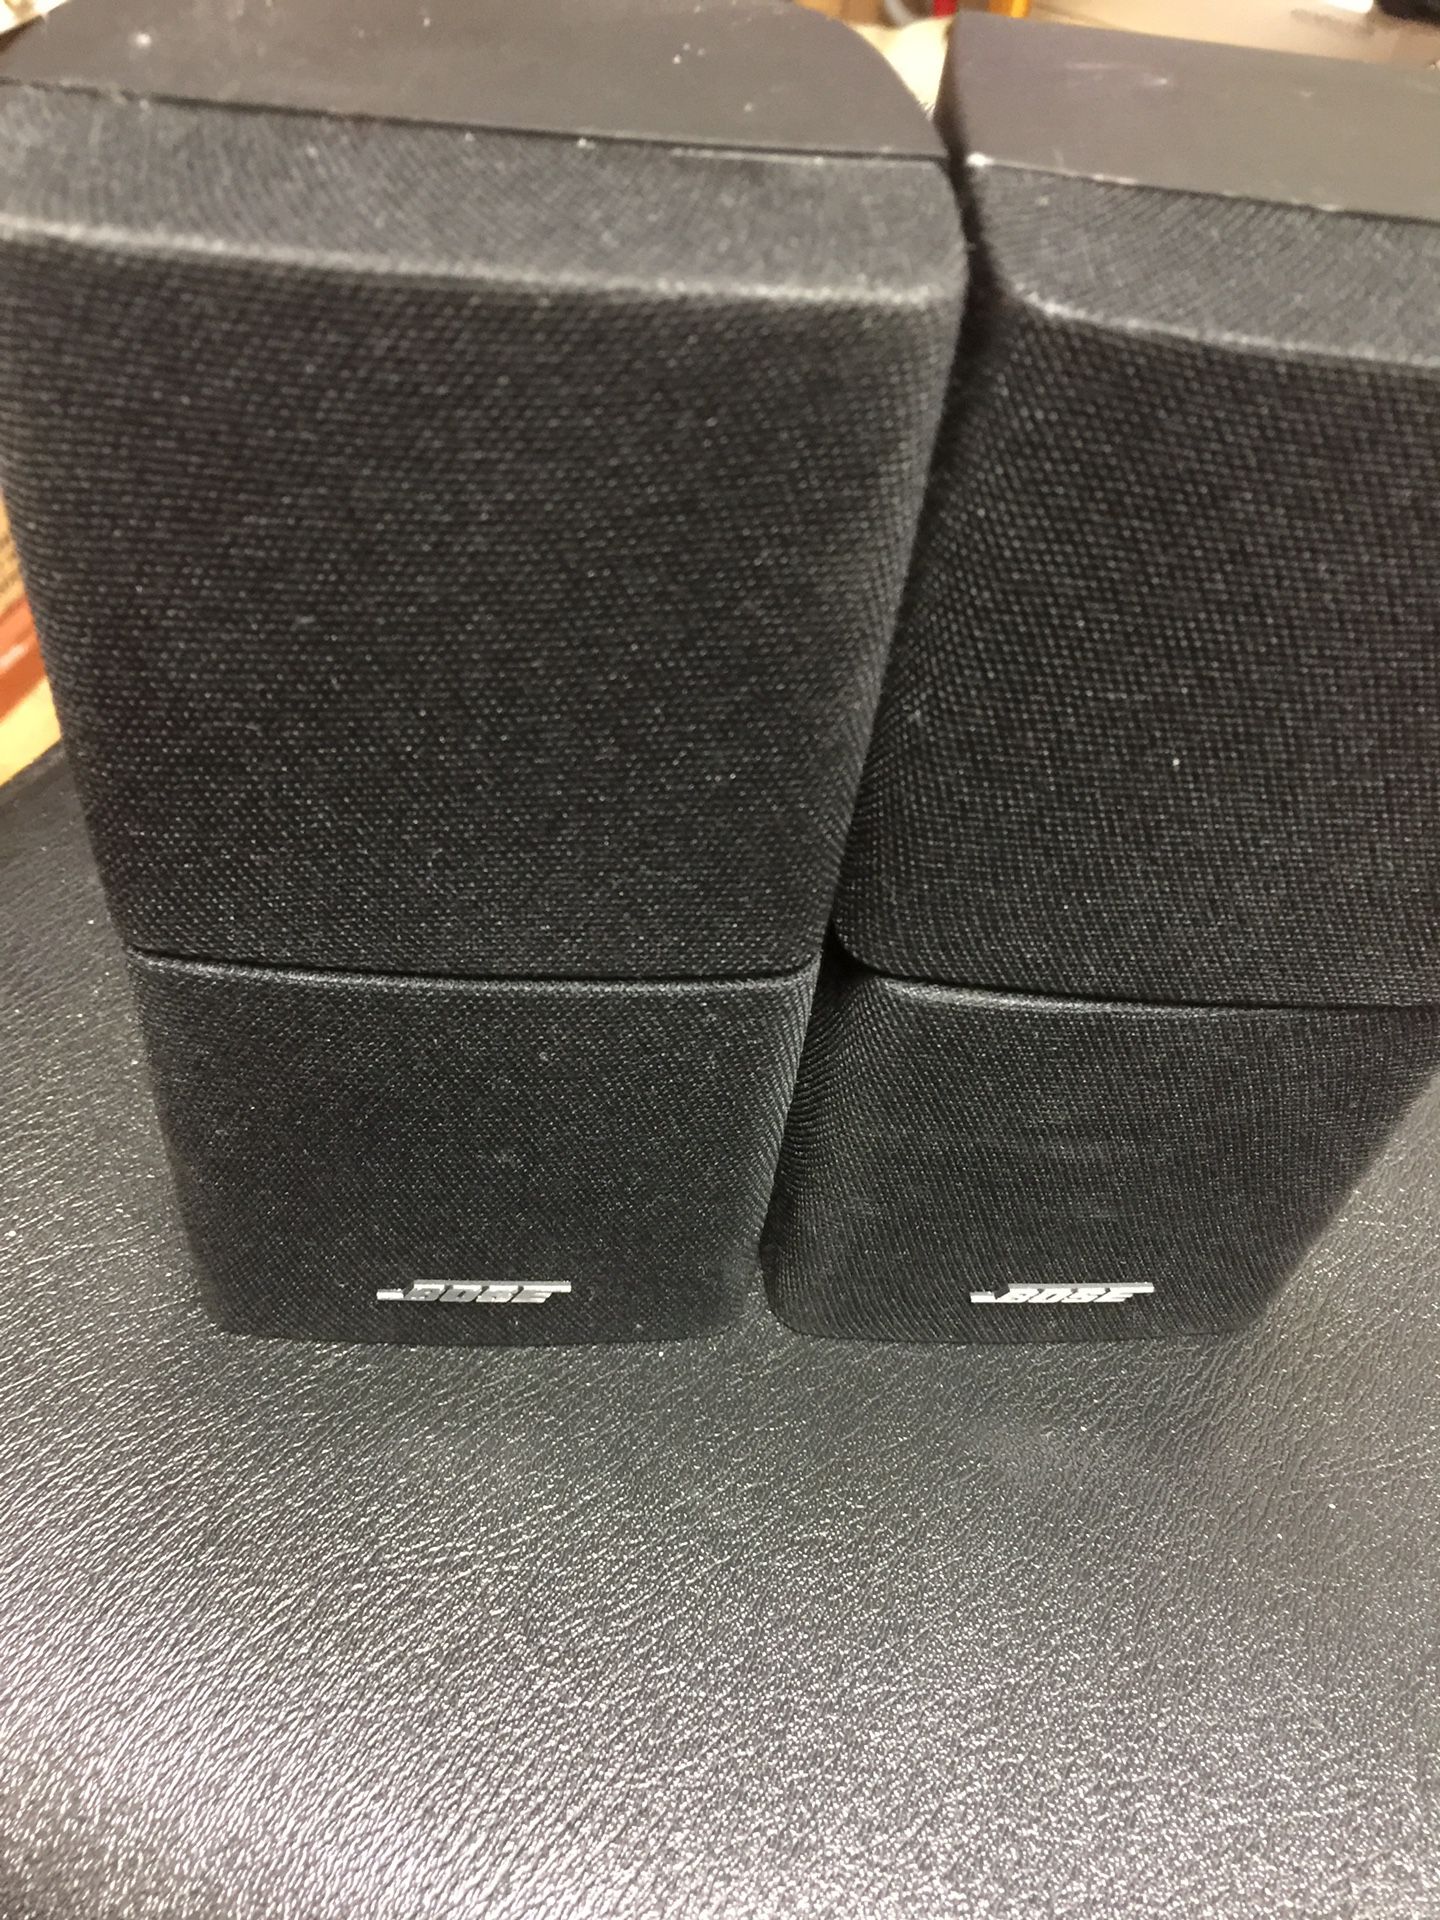 bose double speakers